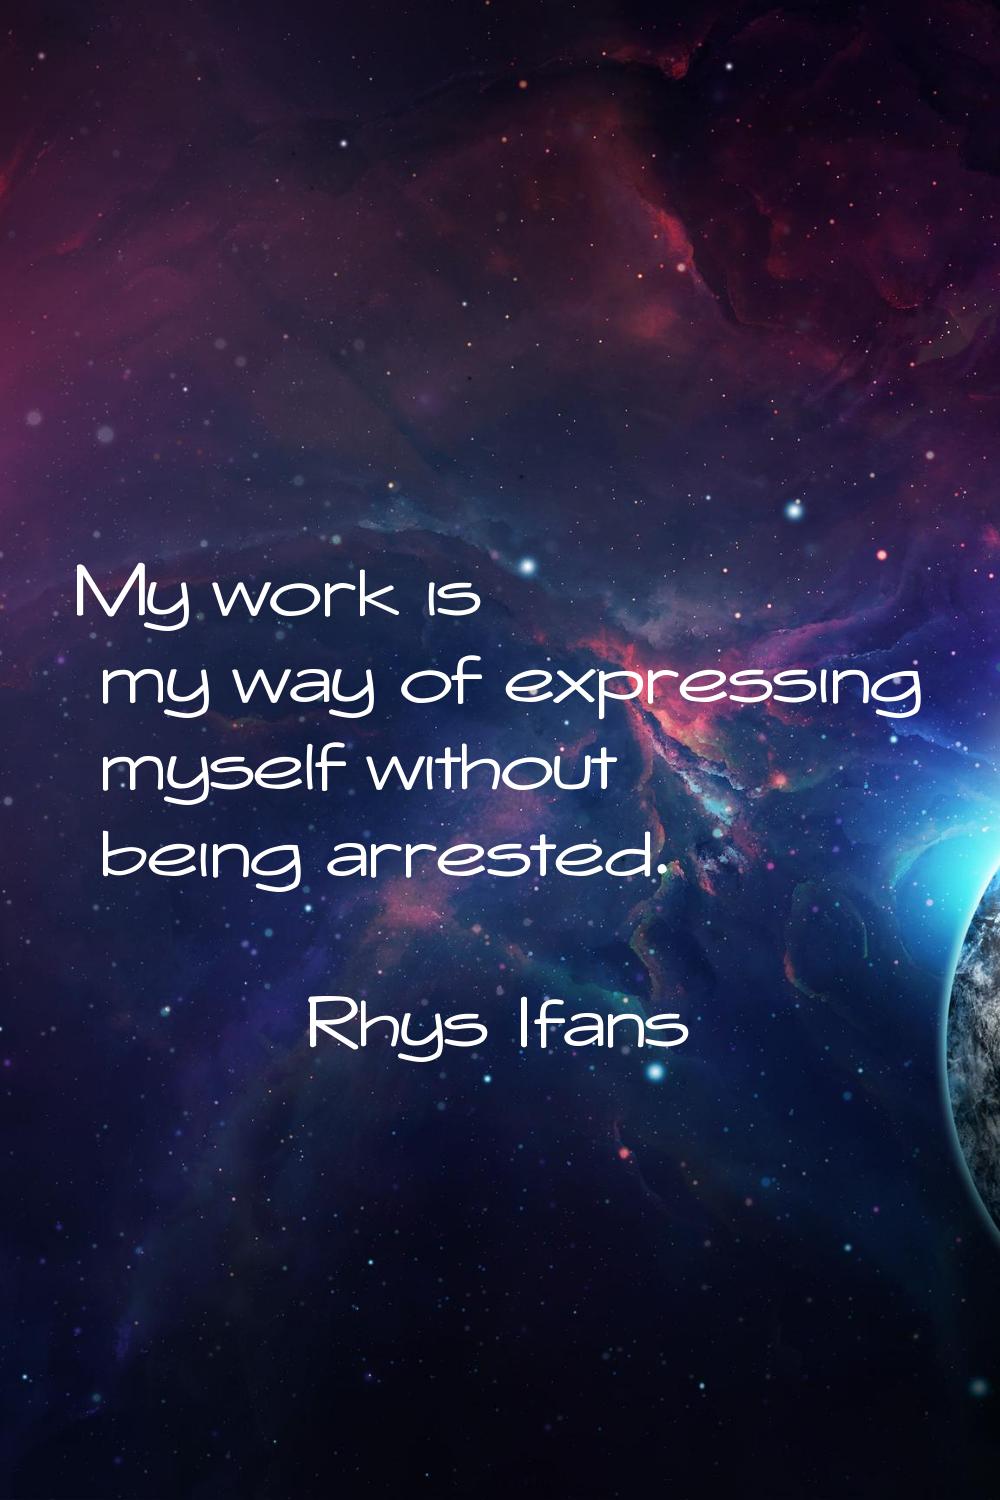 My work is my way of expressing myself without being arrested.